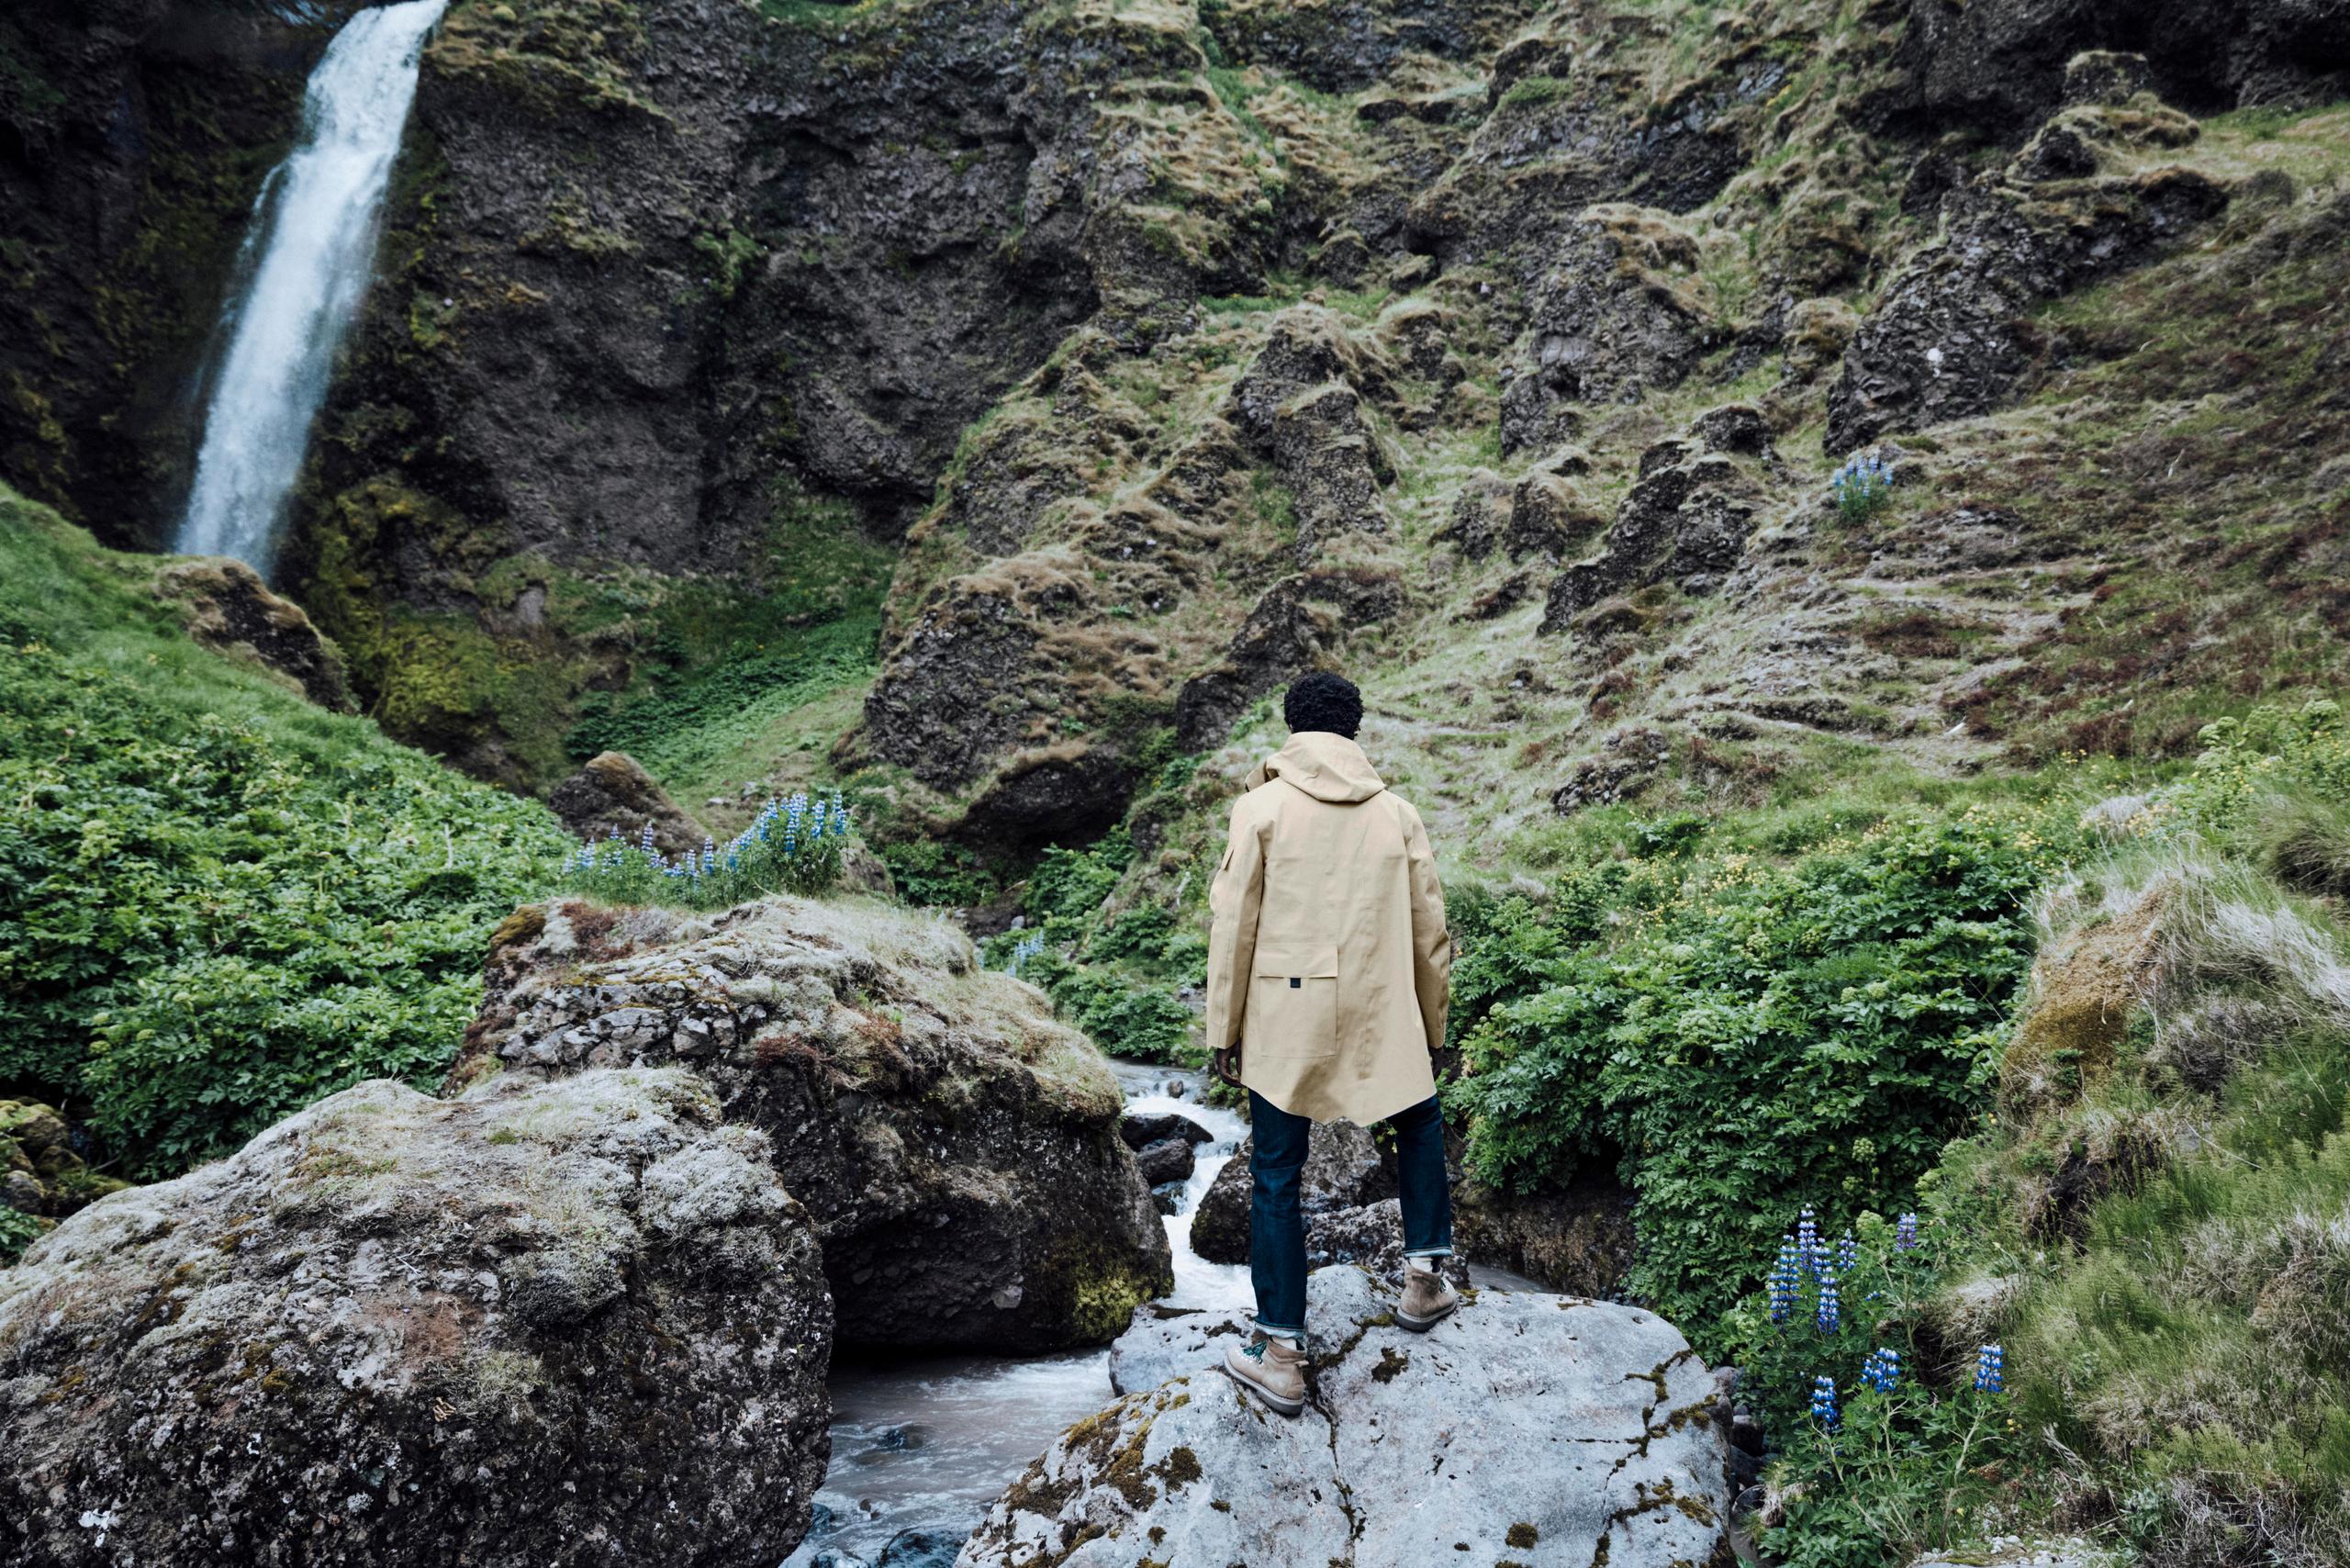 Man in AETHER + Mackintosh jacket hiking on rocky terrain next to waterfall in Iceland